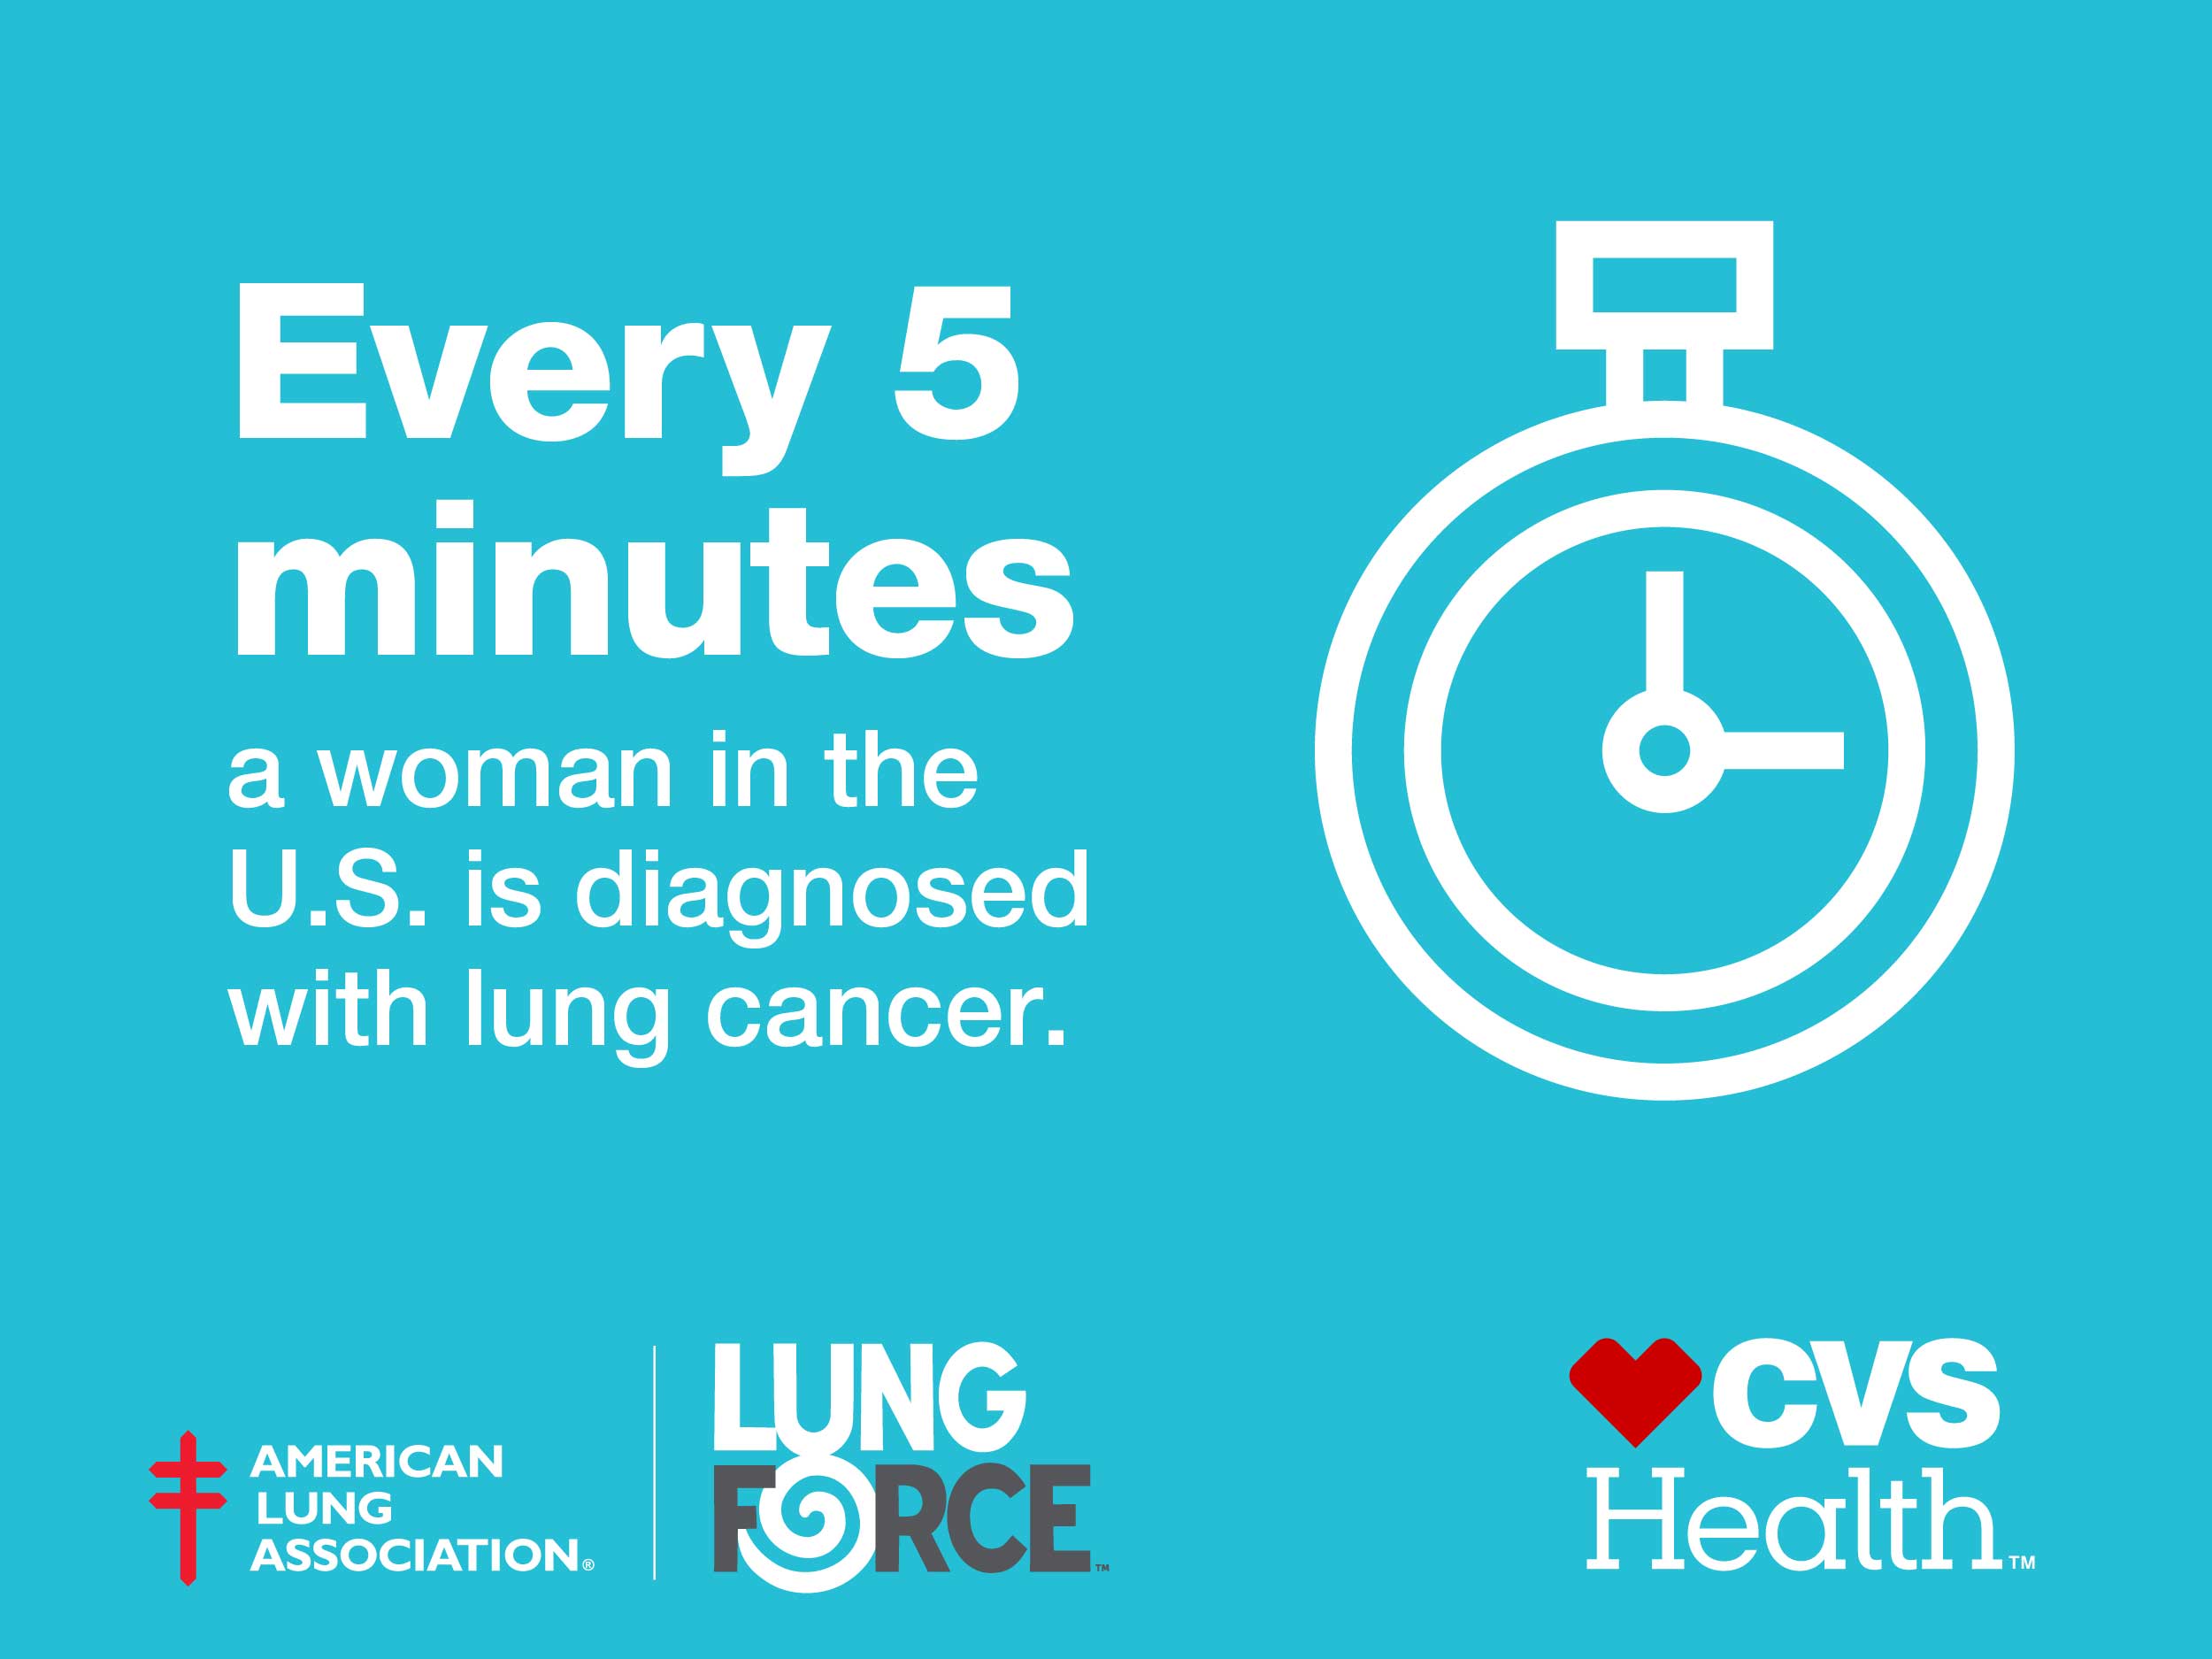 Every 5 minutes a woman in the U.S. is diagnosed with lung cancer.